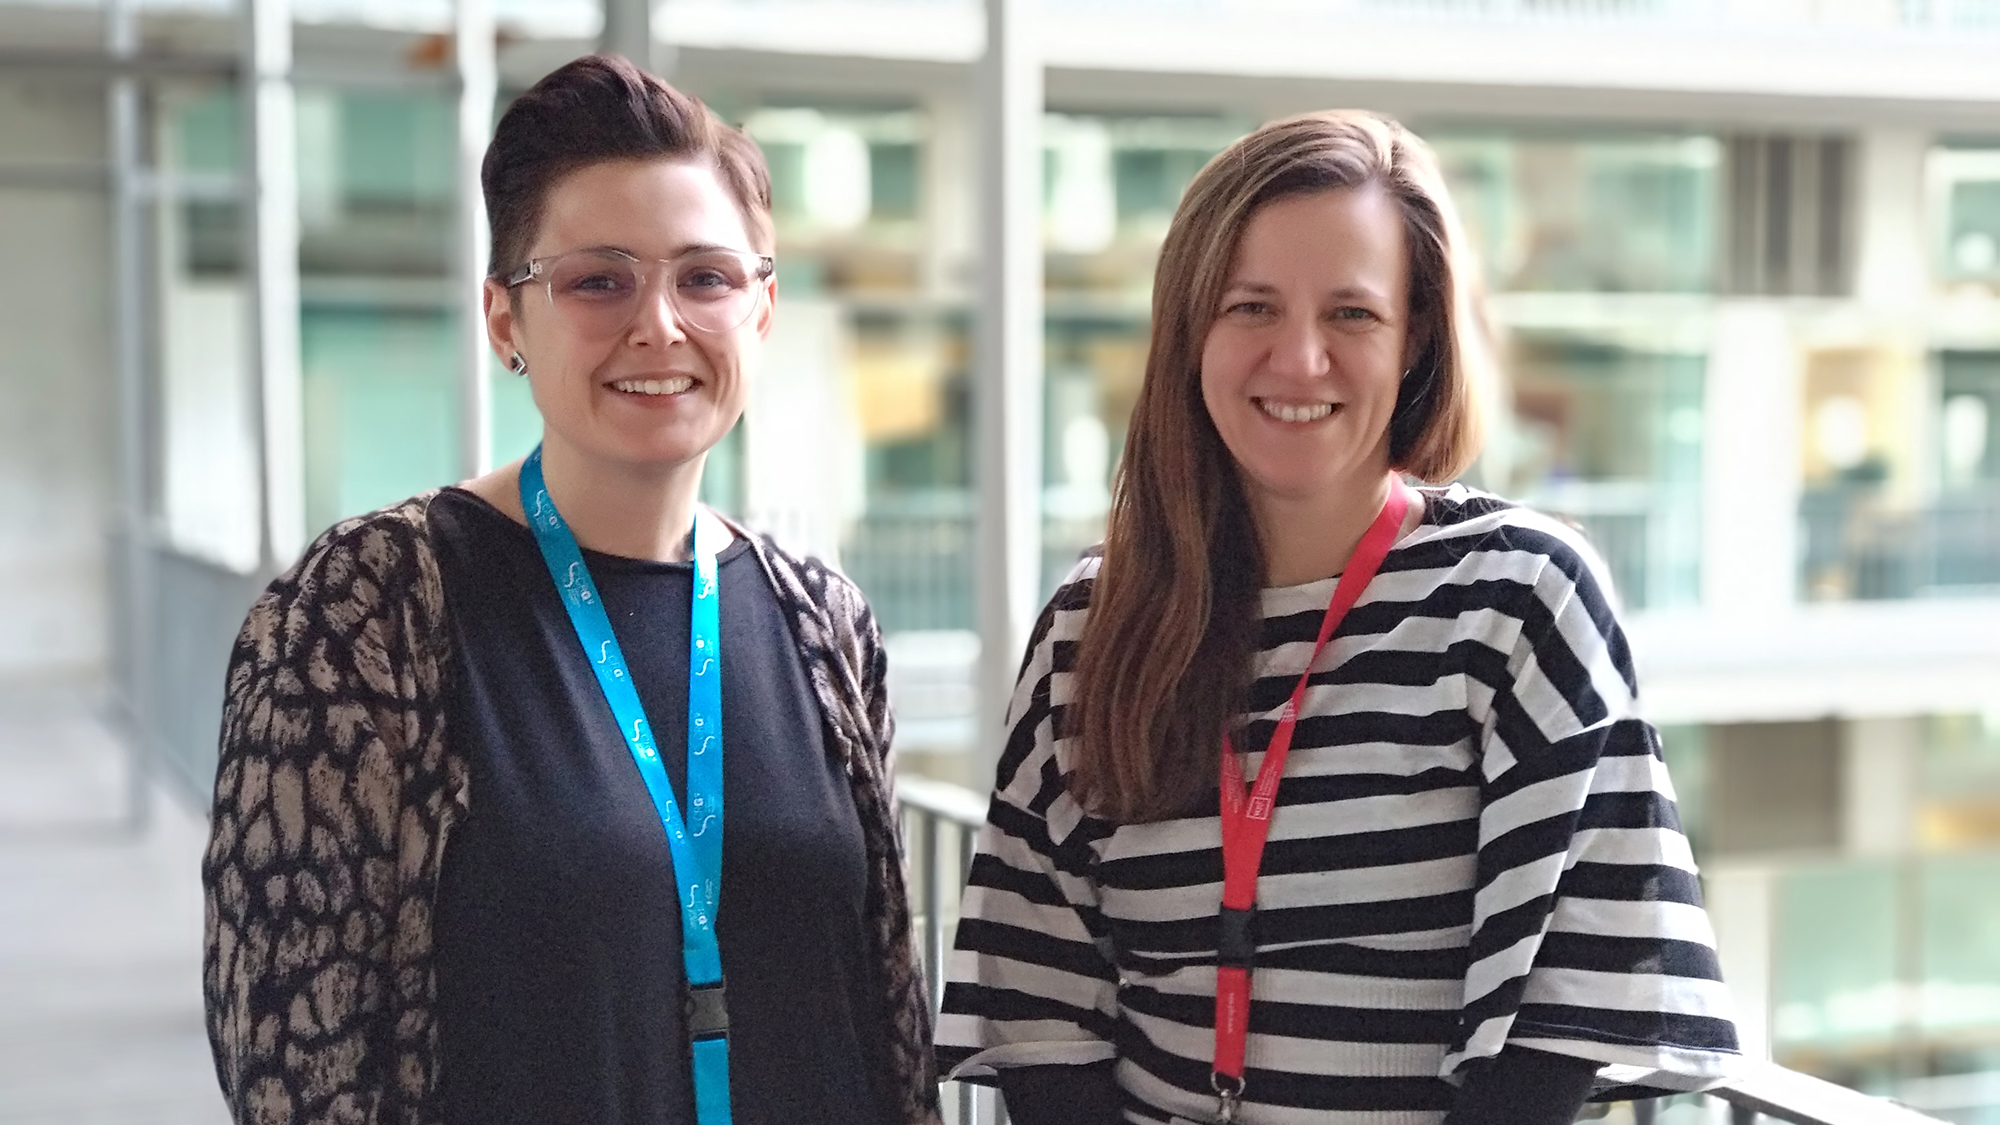 Sara Sceldi and Ana Janic, are two new research group leaders working on cancer at the PRBB.